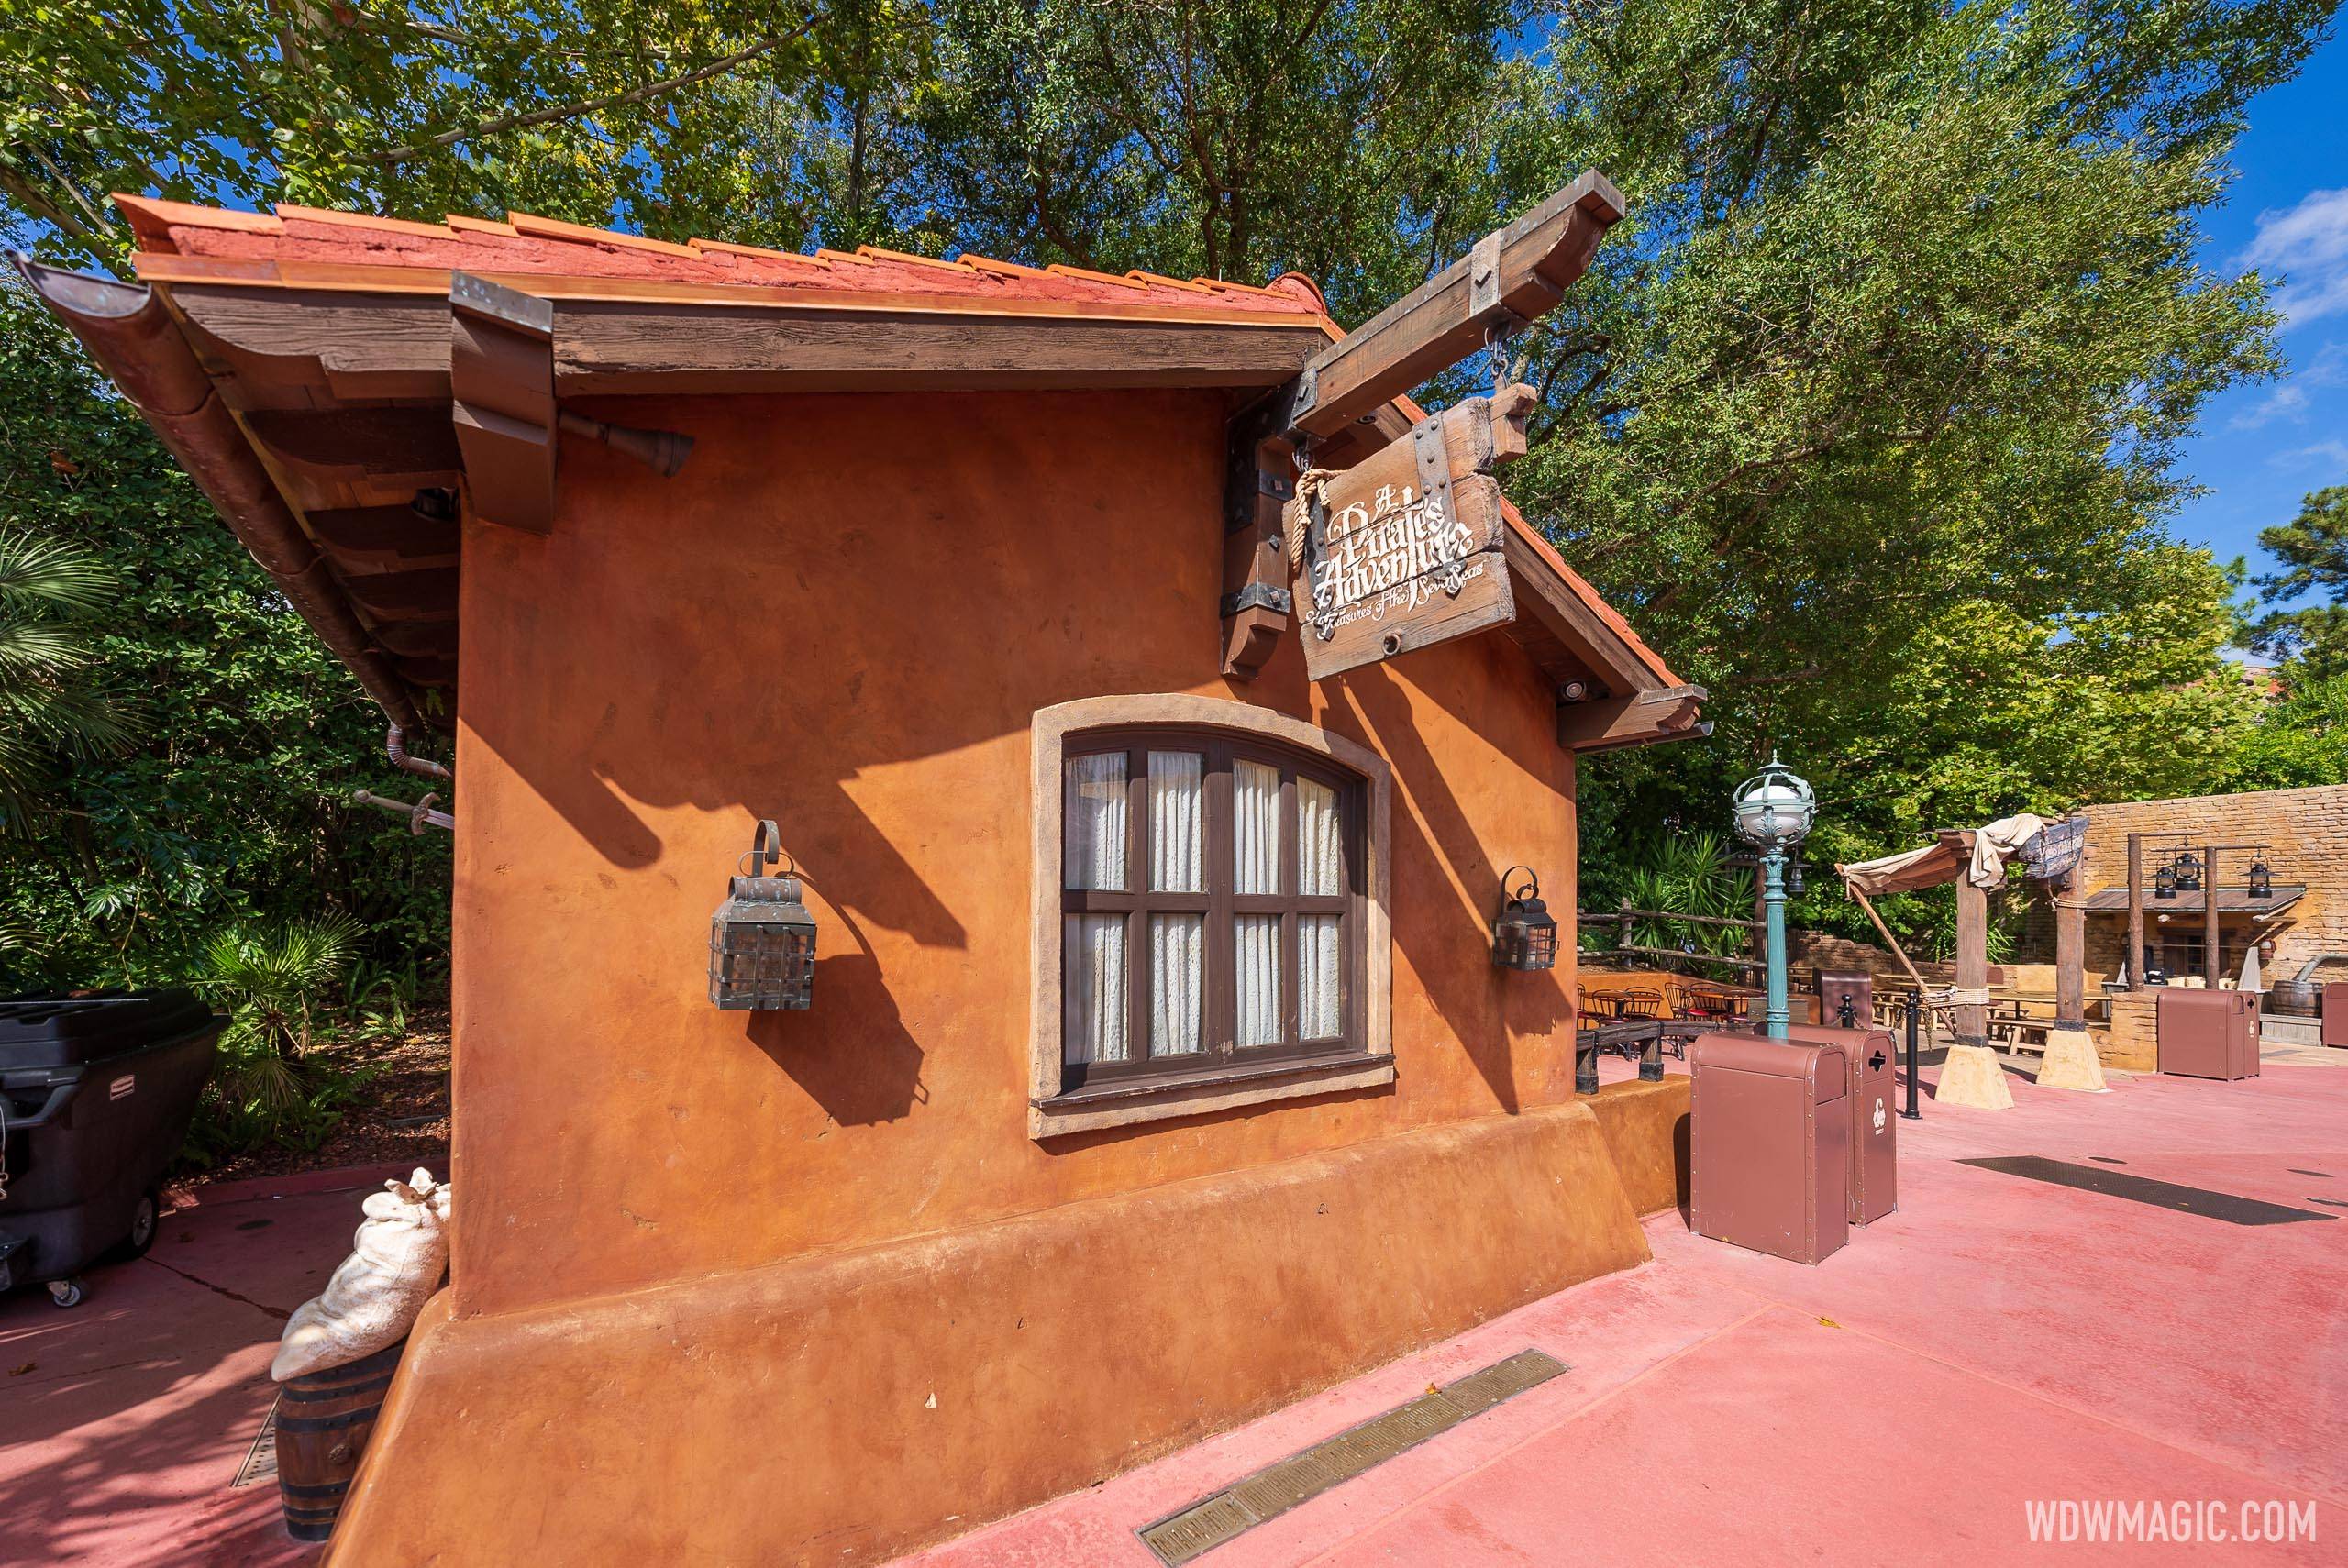 'A Pirate's Adventure Treasures of the Seven Seas' has reopened to guests at Magic Kingdom